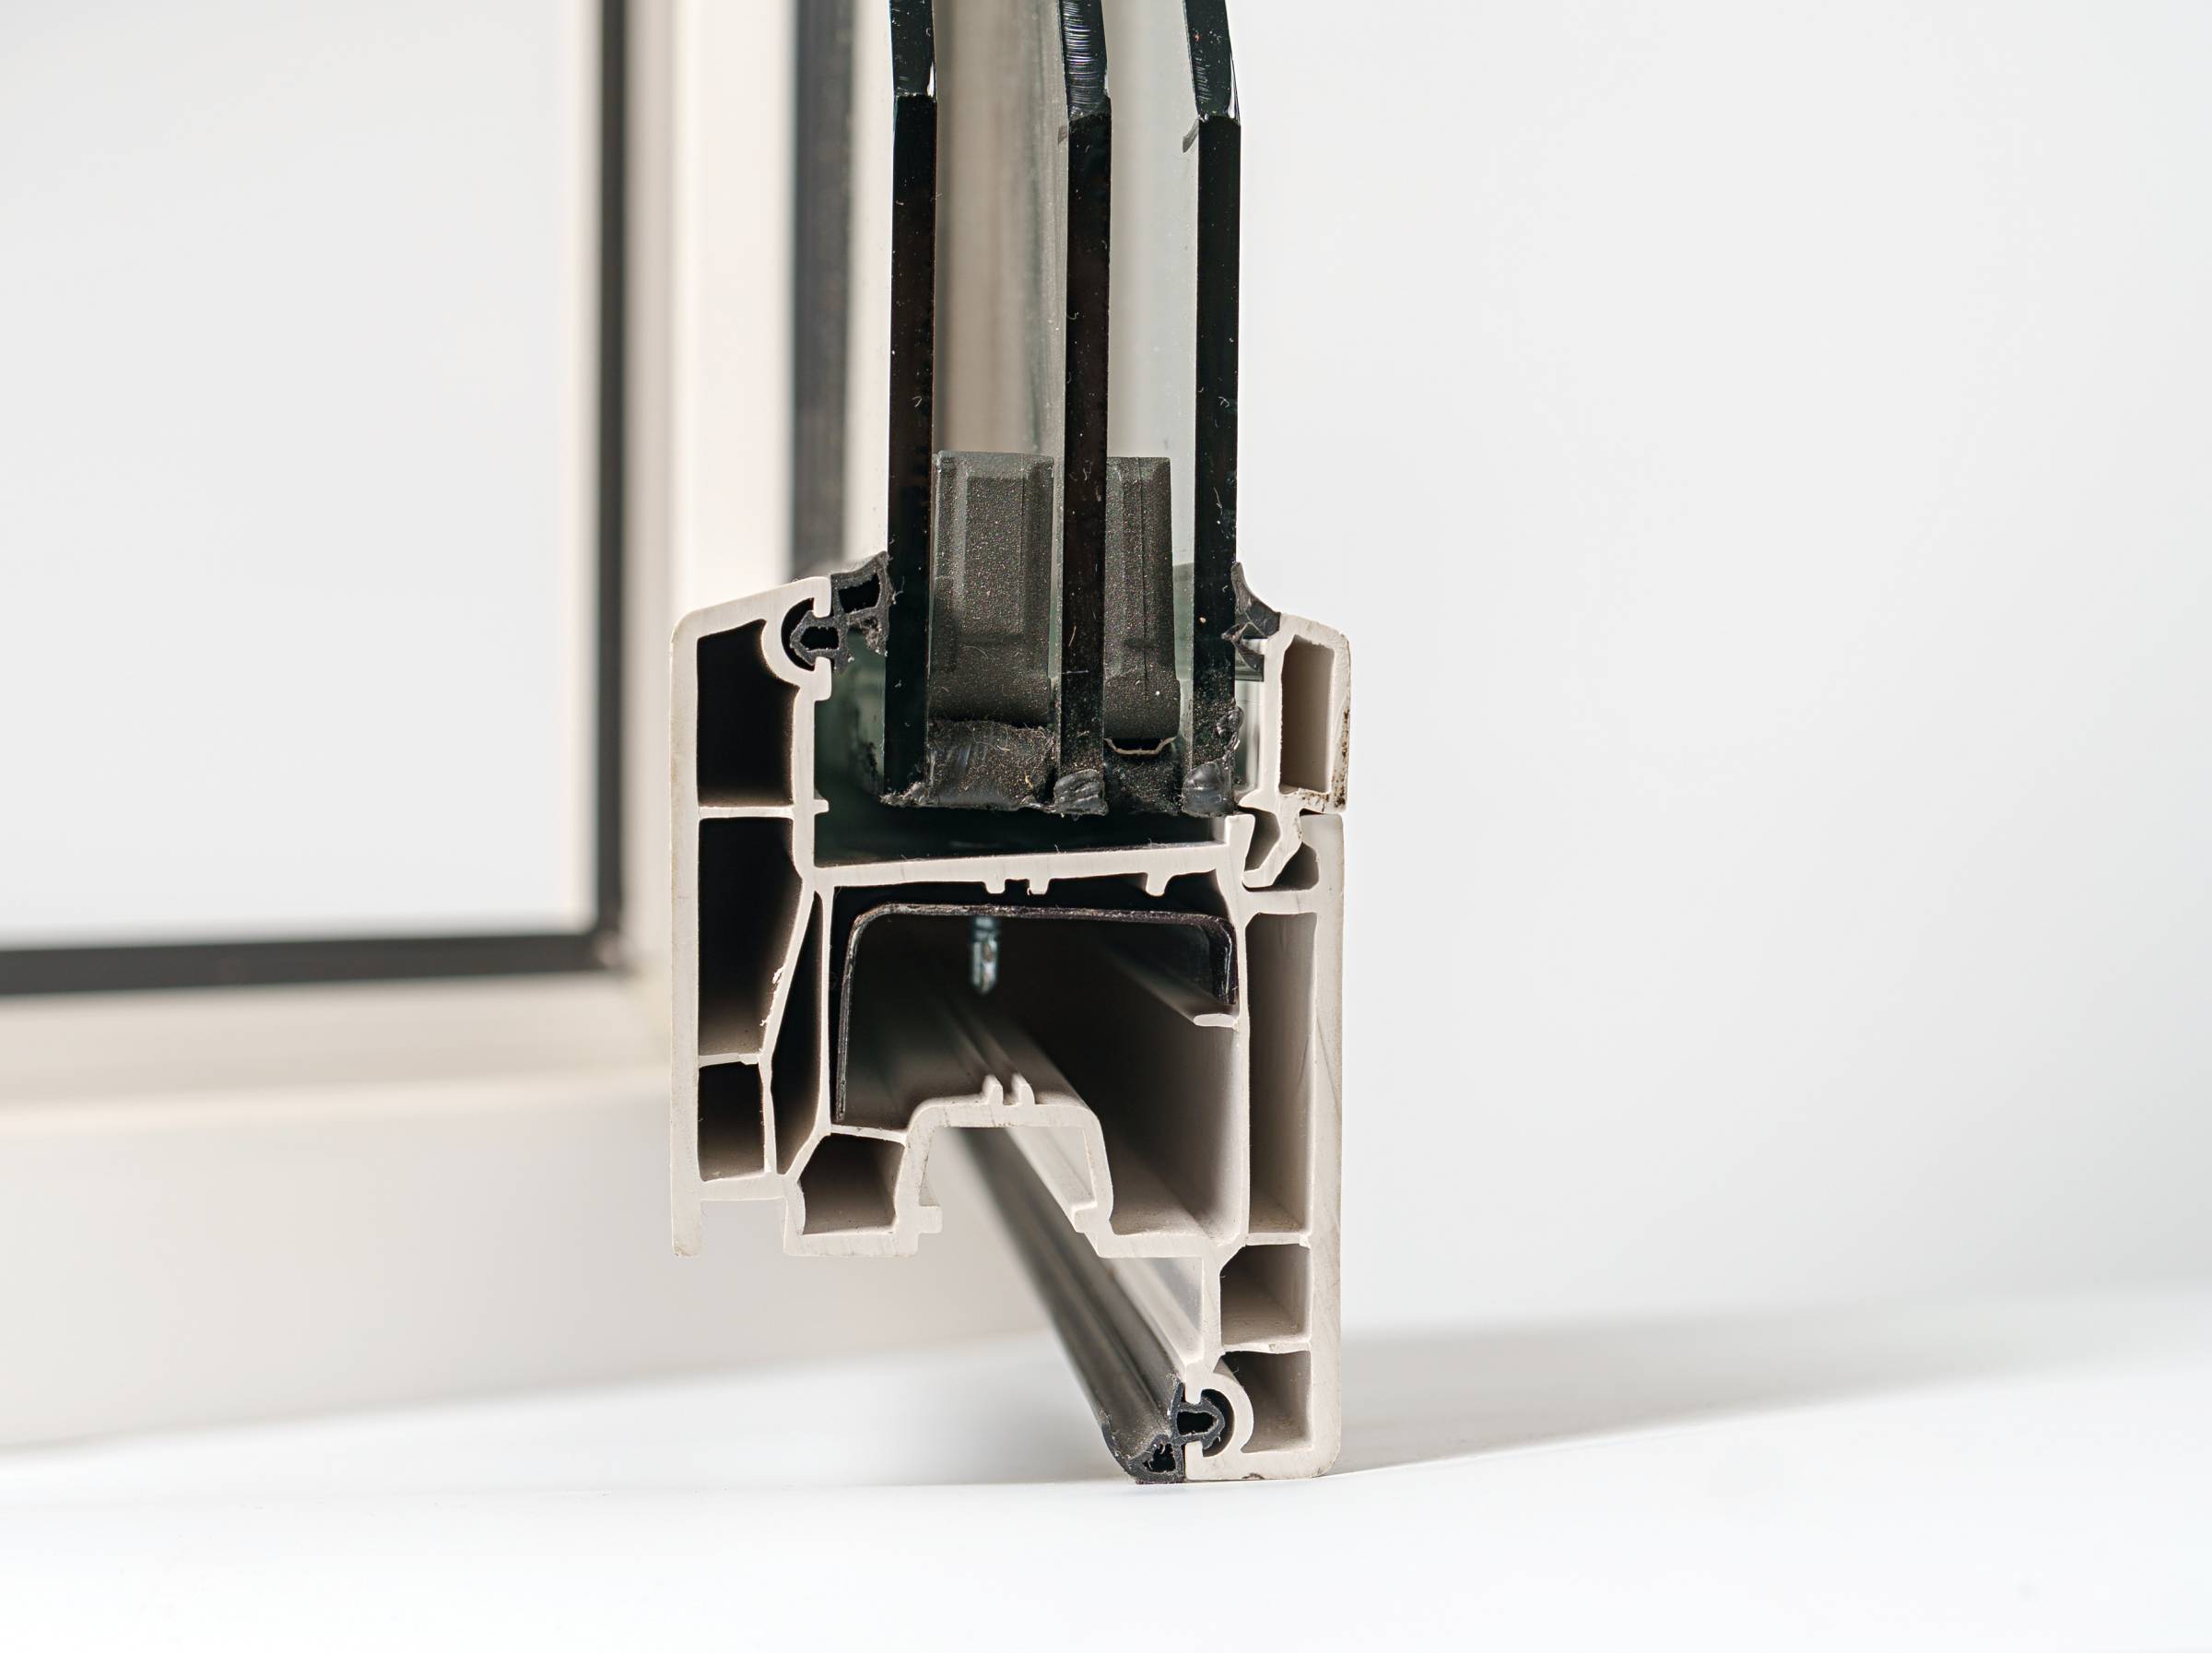 a sample of triple glazing for windows